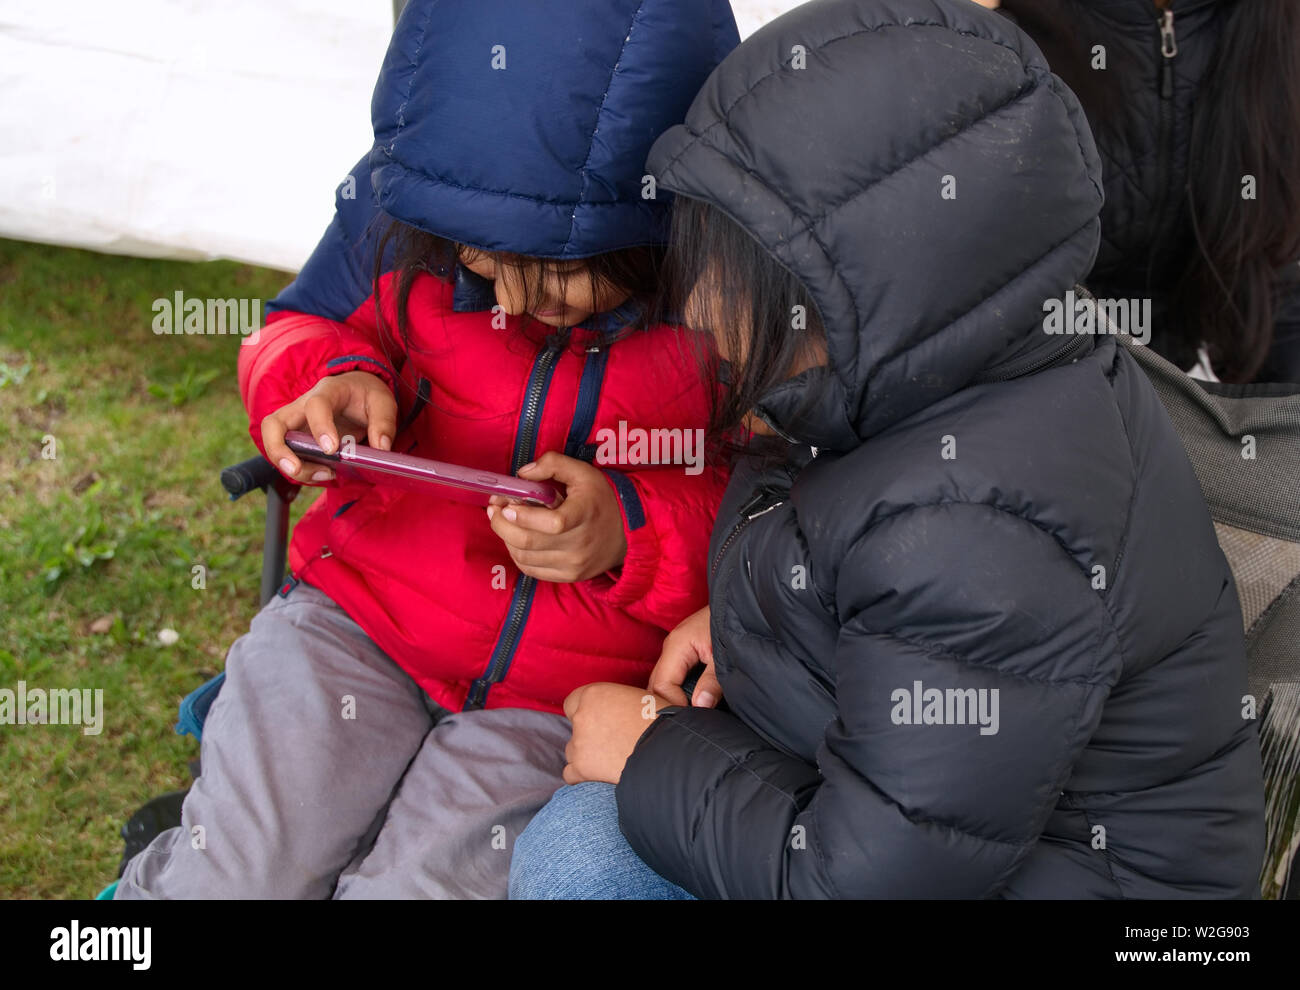 Meriden, CT USA. Apr 2019. Daffodil Festival. Native American children huddled together playing online games on their phone. Stock Photo